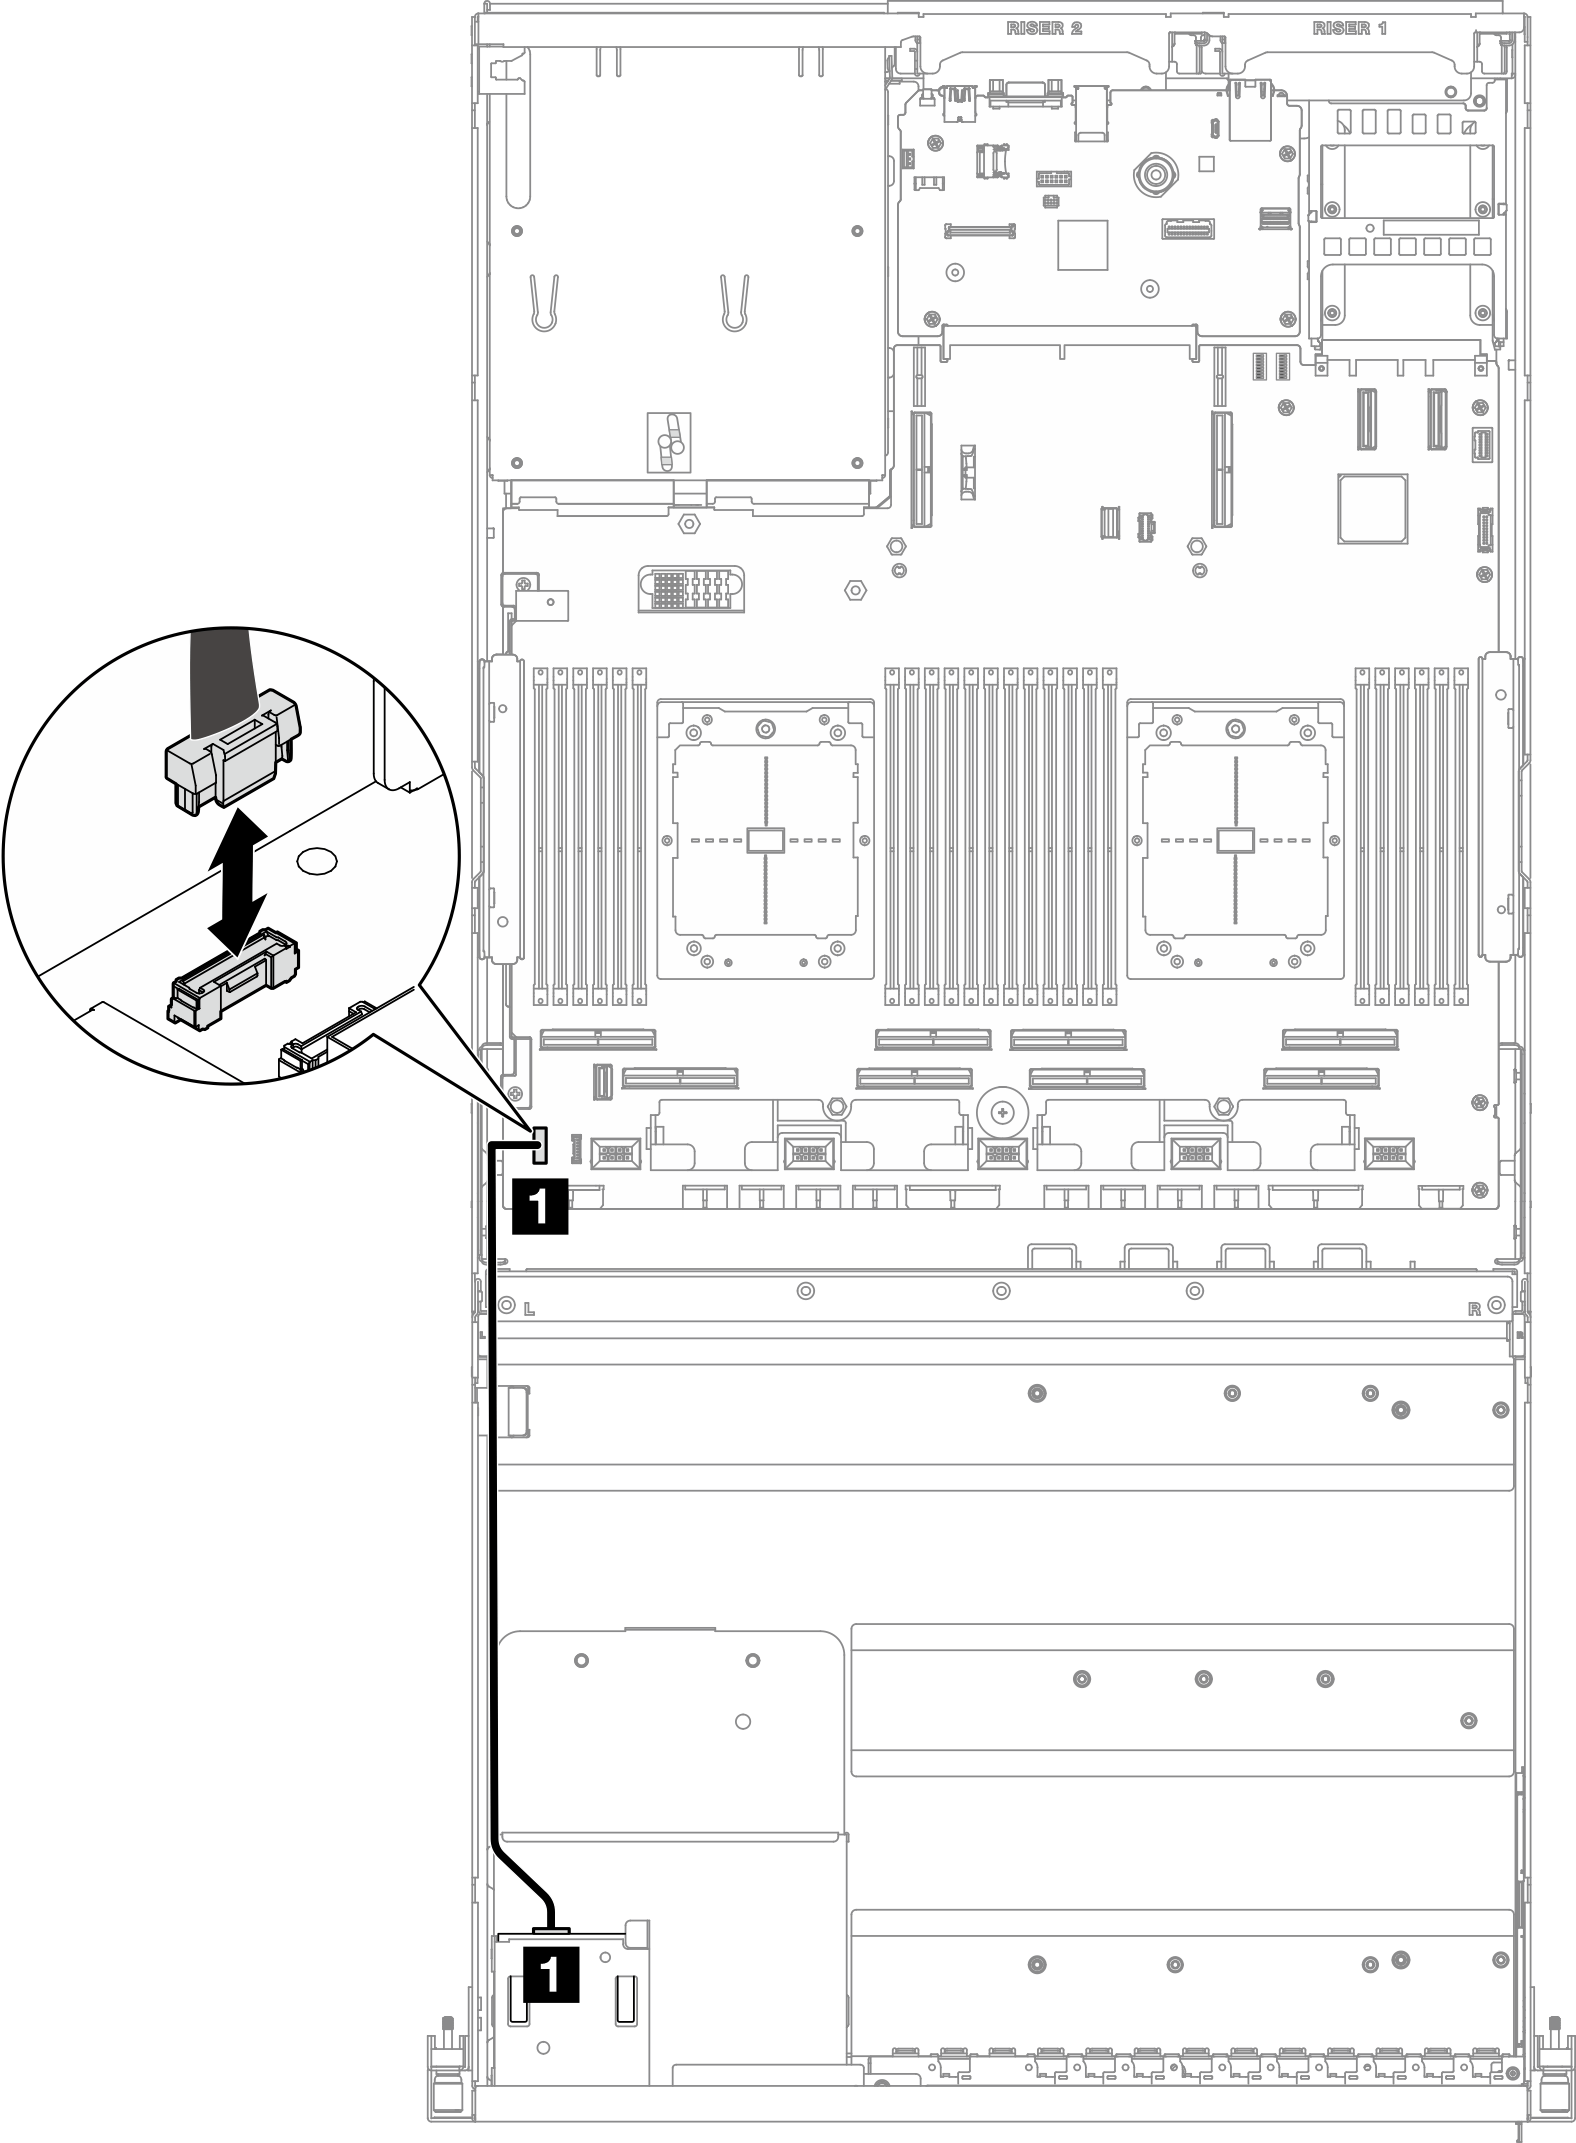 Front operator panel cable disconnection — 4-DW GPU モデル and 8-DW GPU モデル